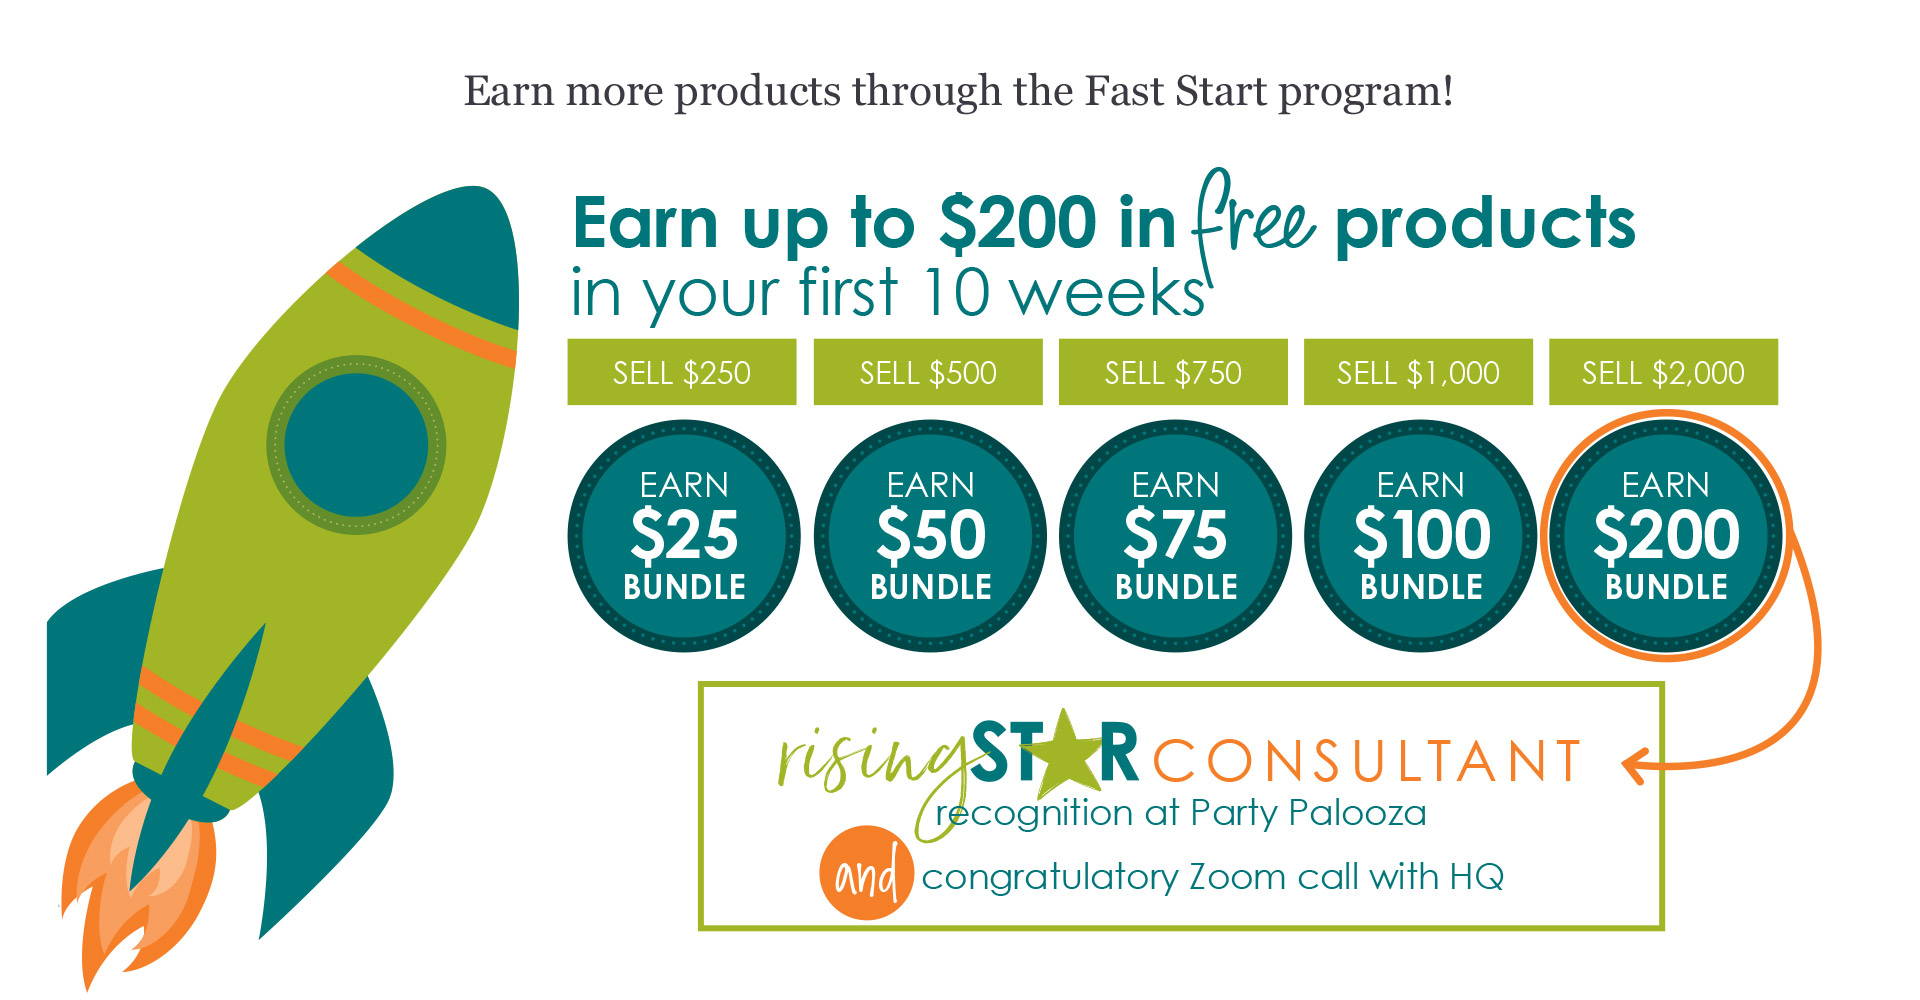 earn more products through the Fast Start program!